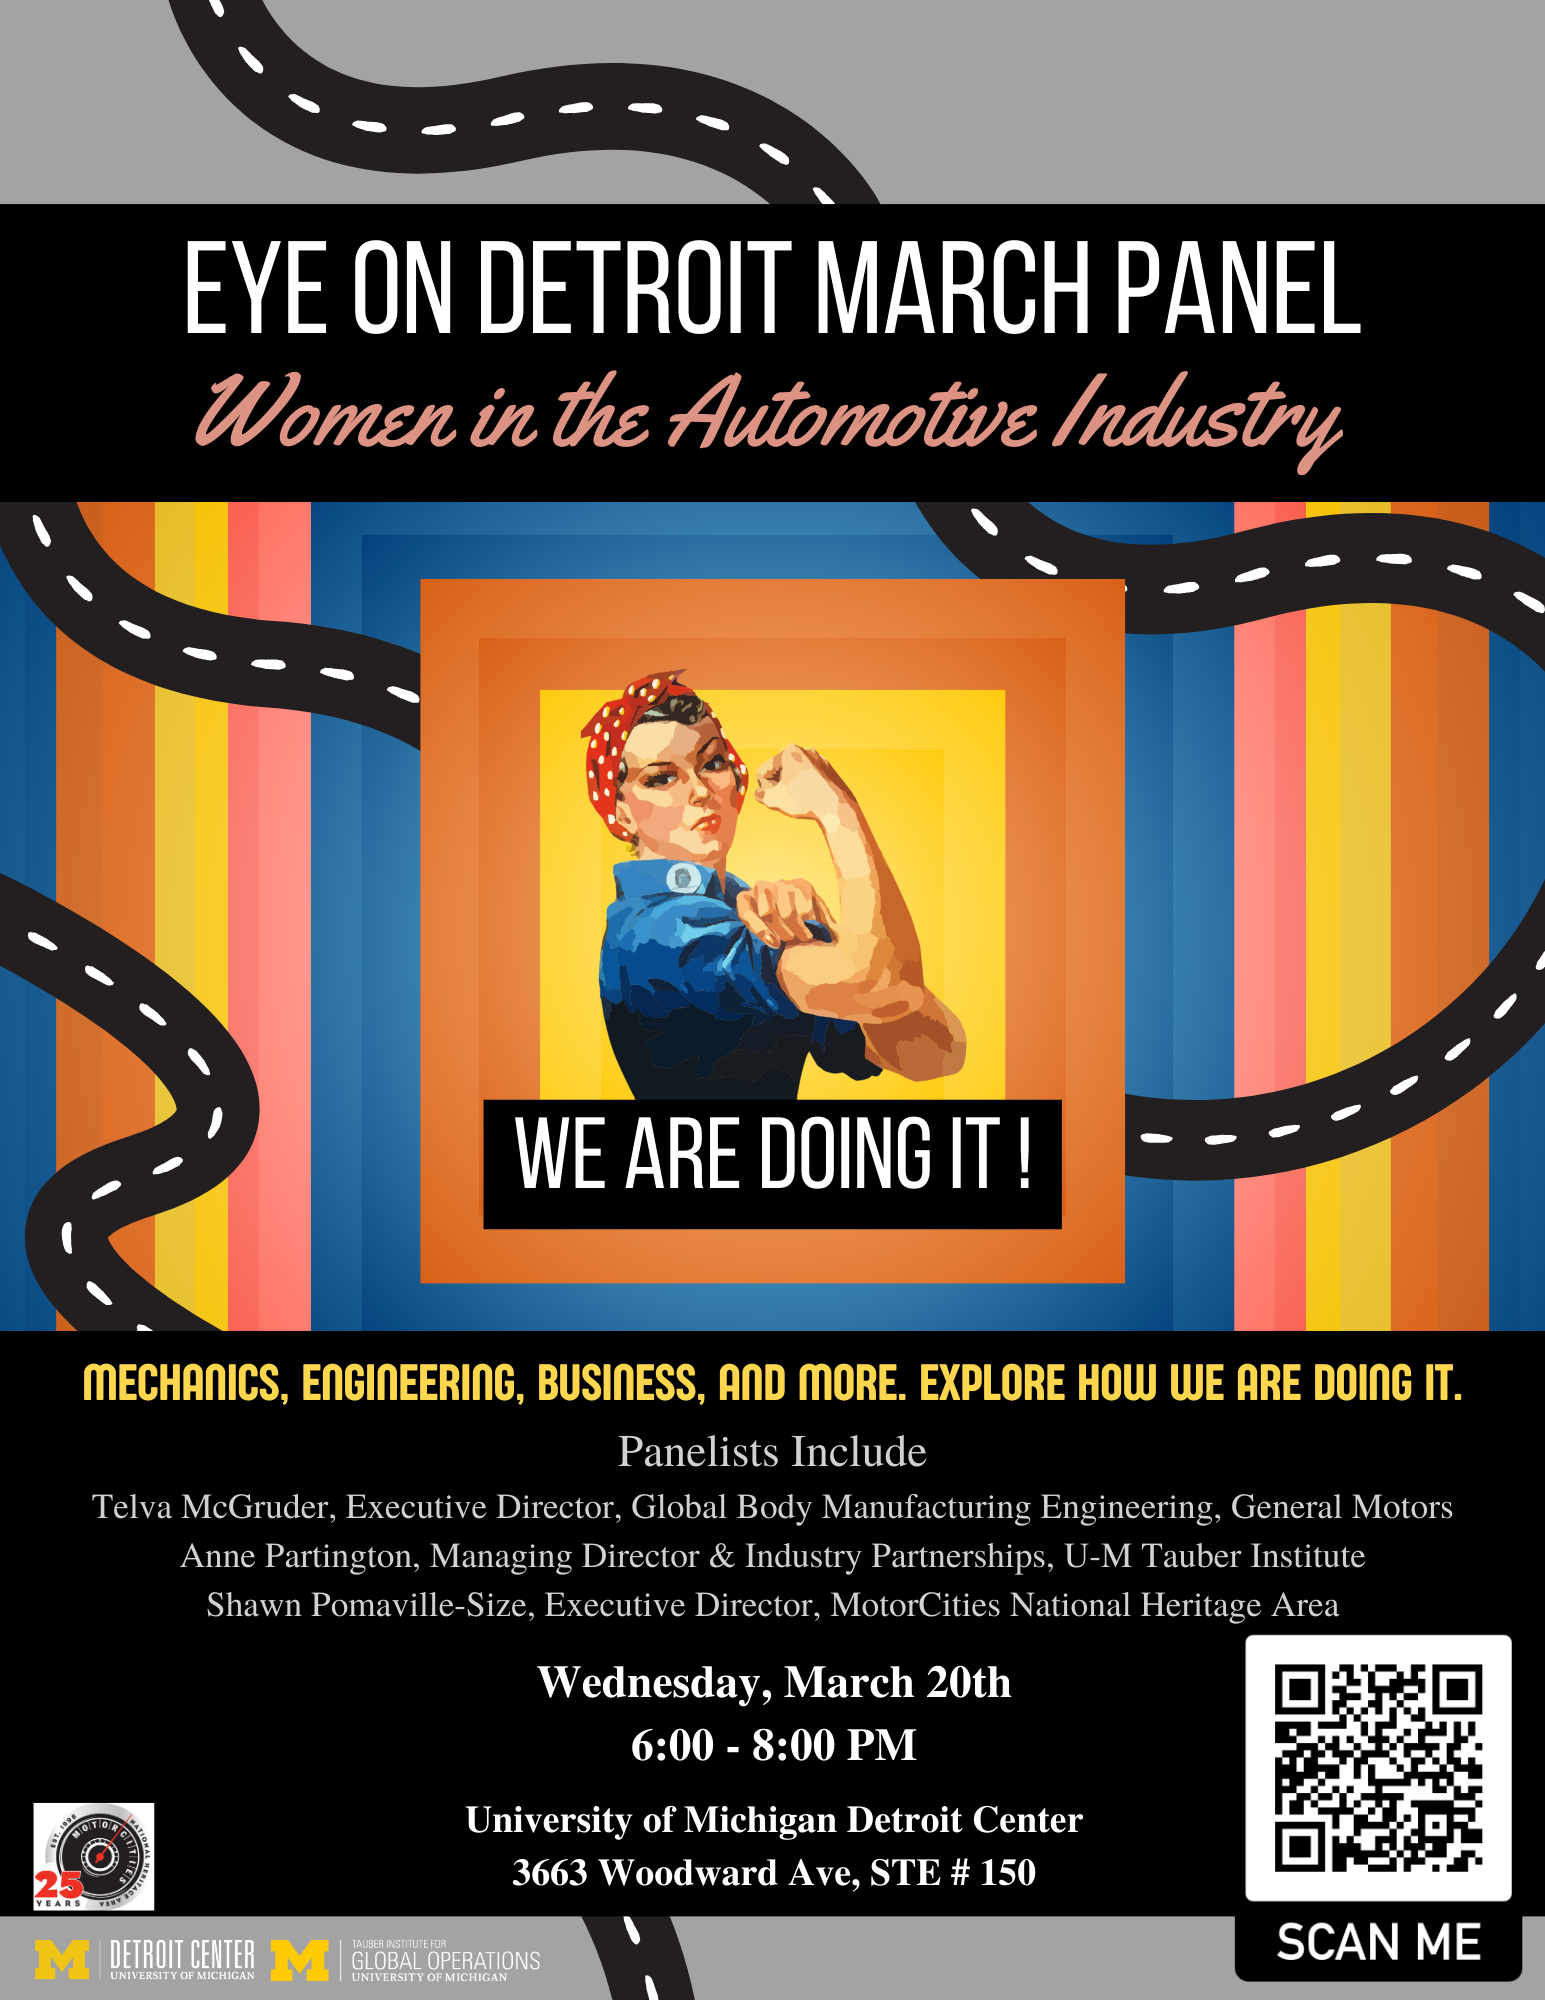 Photo of Rosie the Riveter illustration; panelist and event information